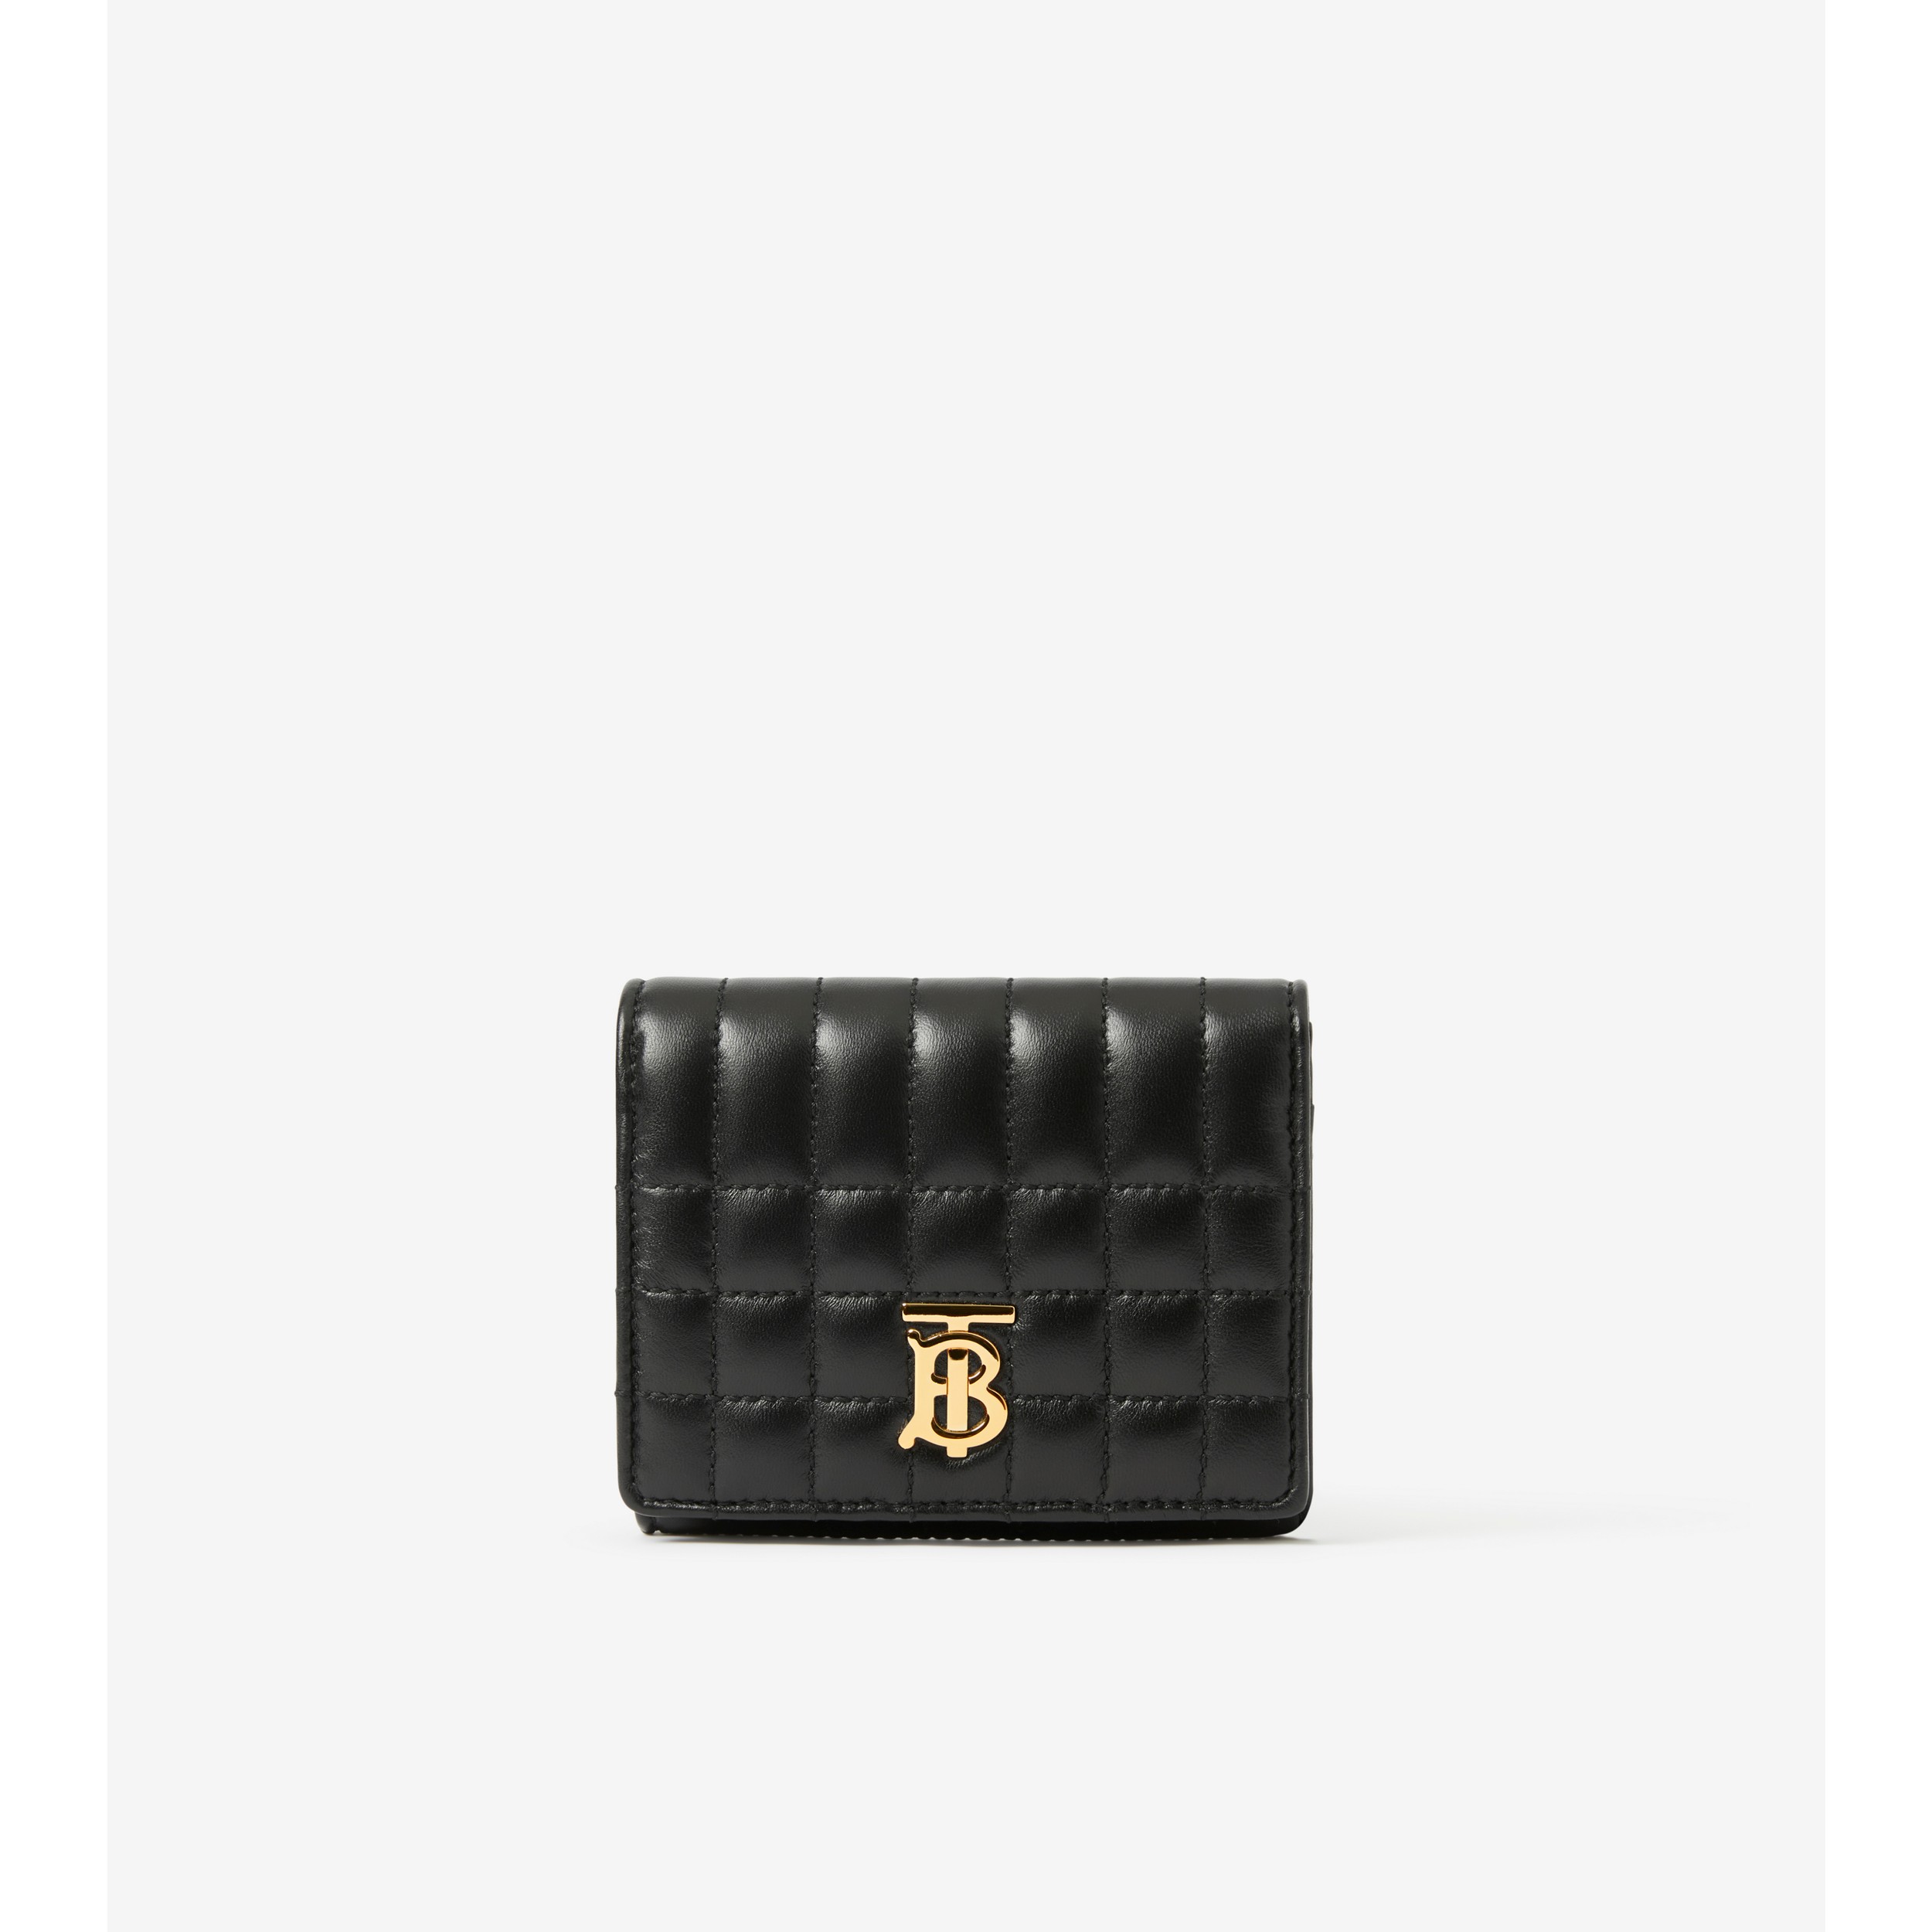 Burberry Lola Quilted Leather Trifold Wallet Black